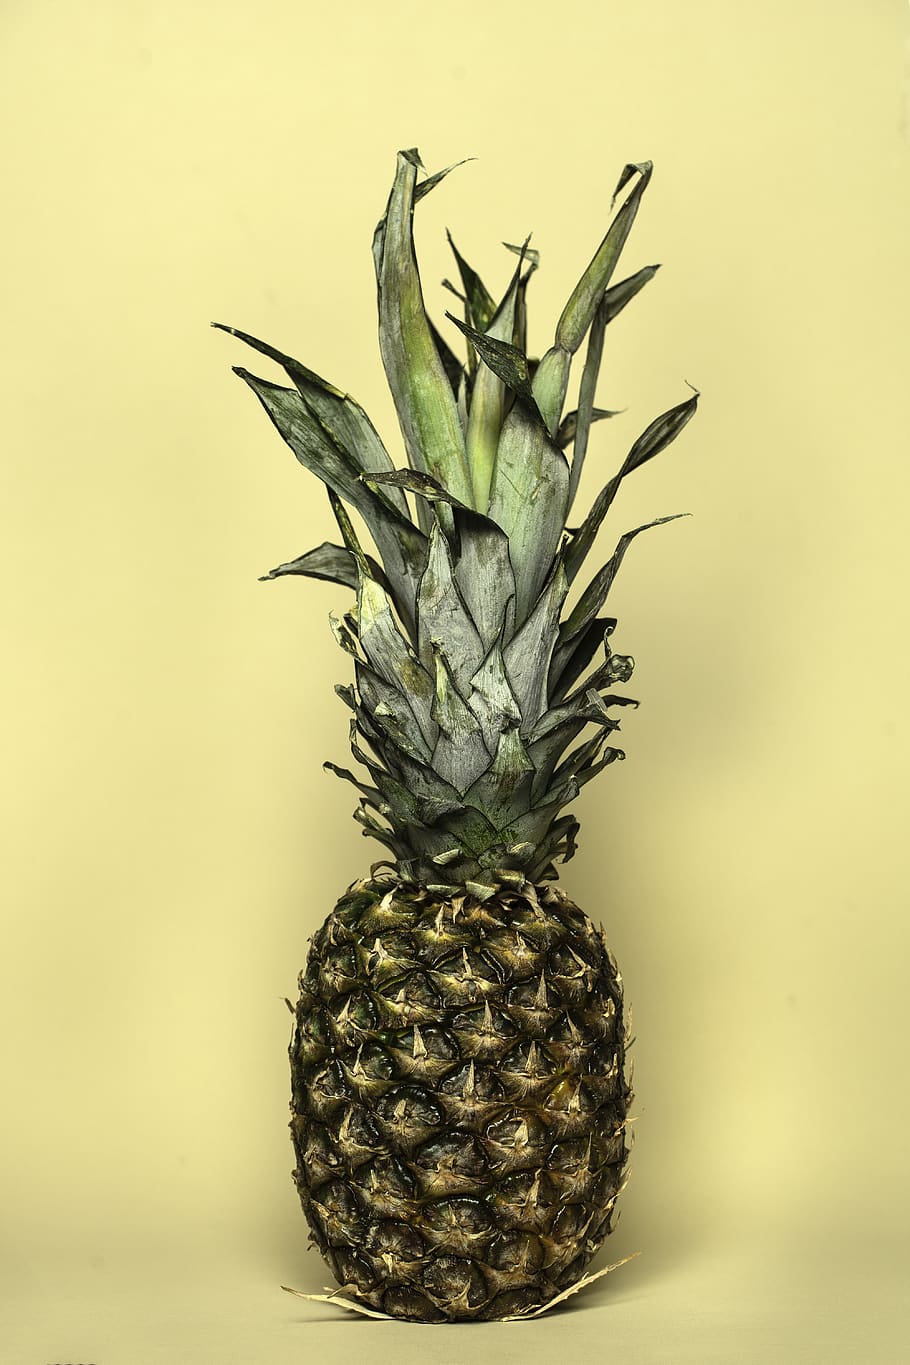  The image features a lone pineapple in the center of a yellow background. The pineapple is partially covered with leaves to help preserve it during storage. The  - Pineapple